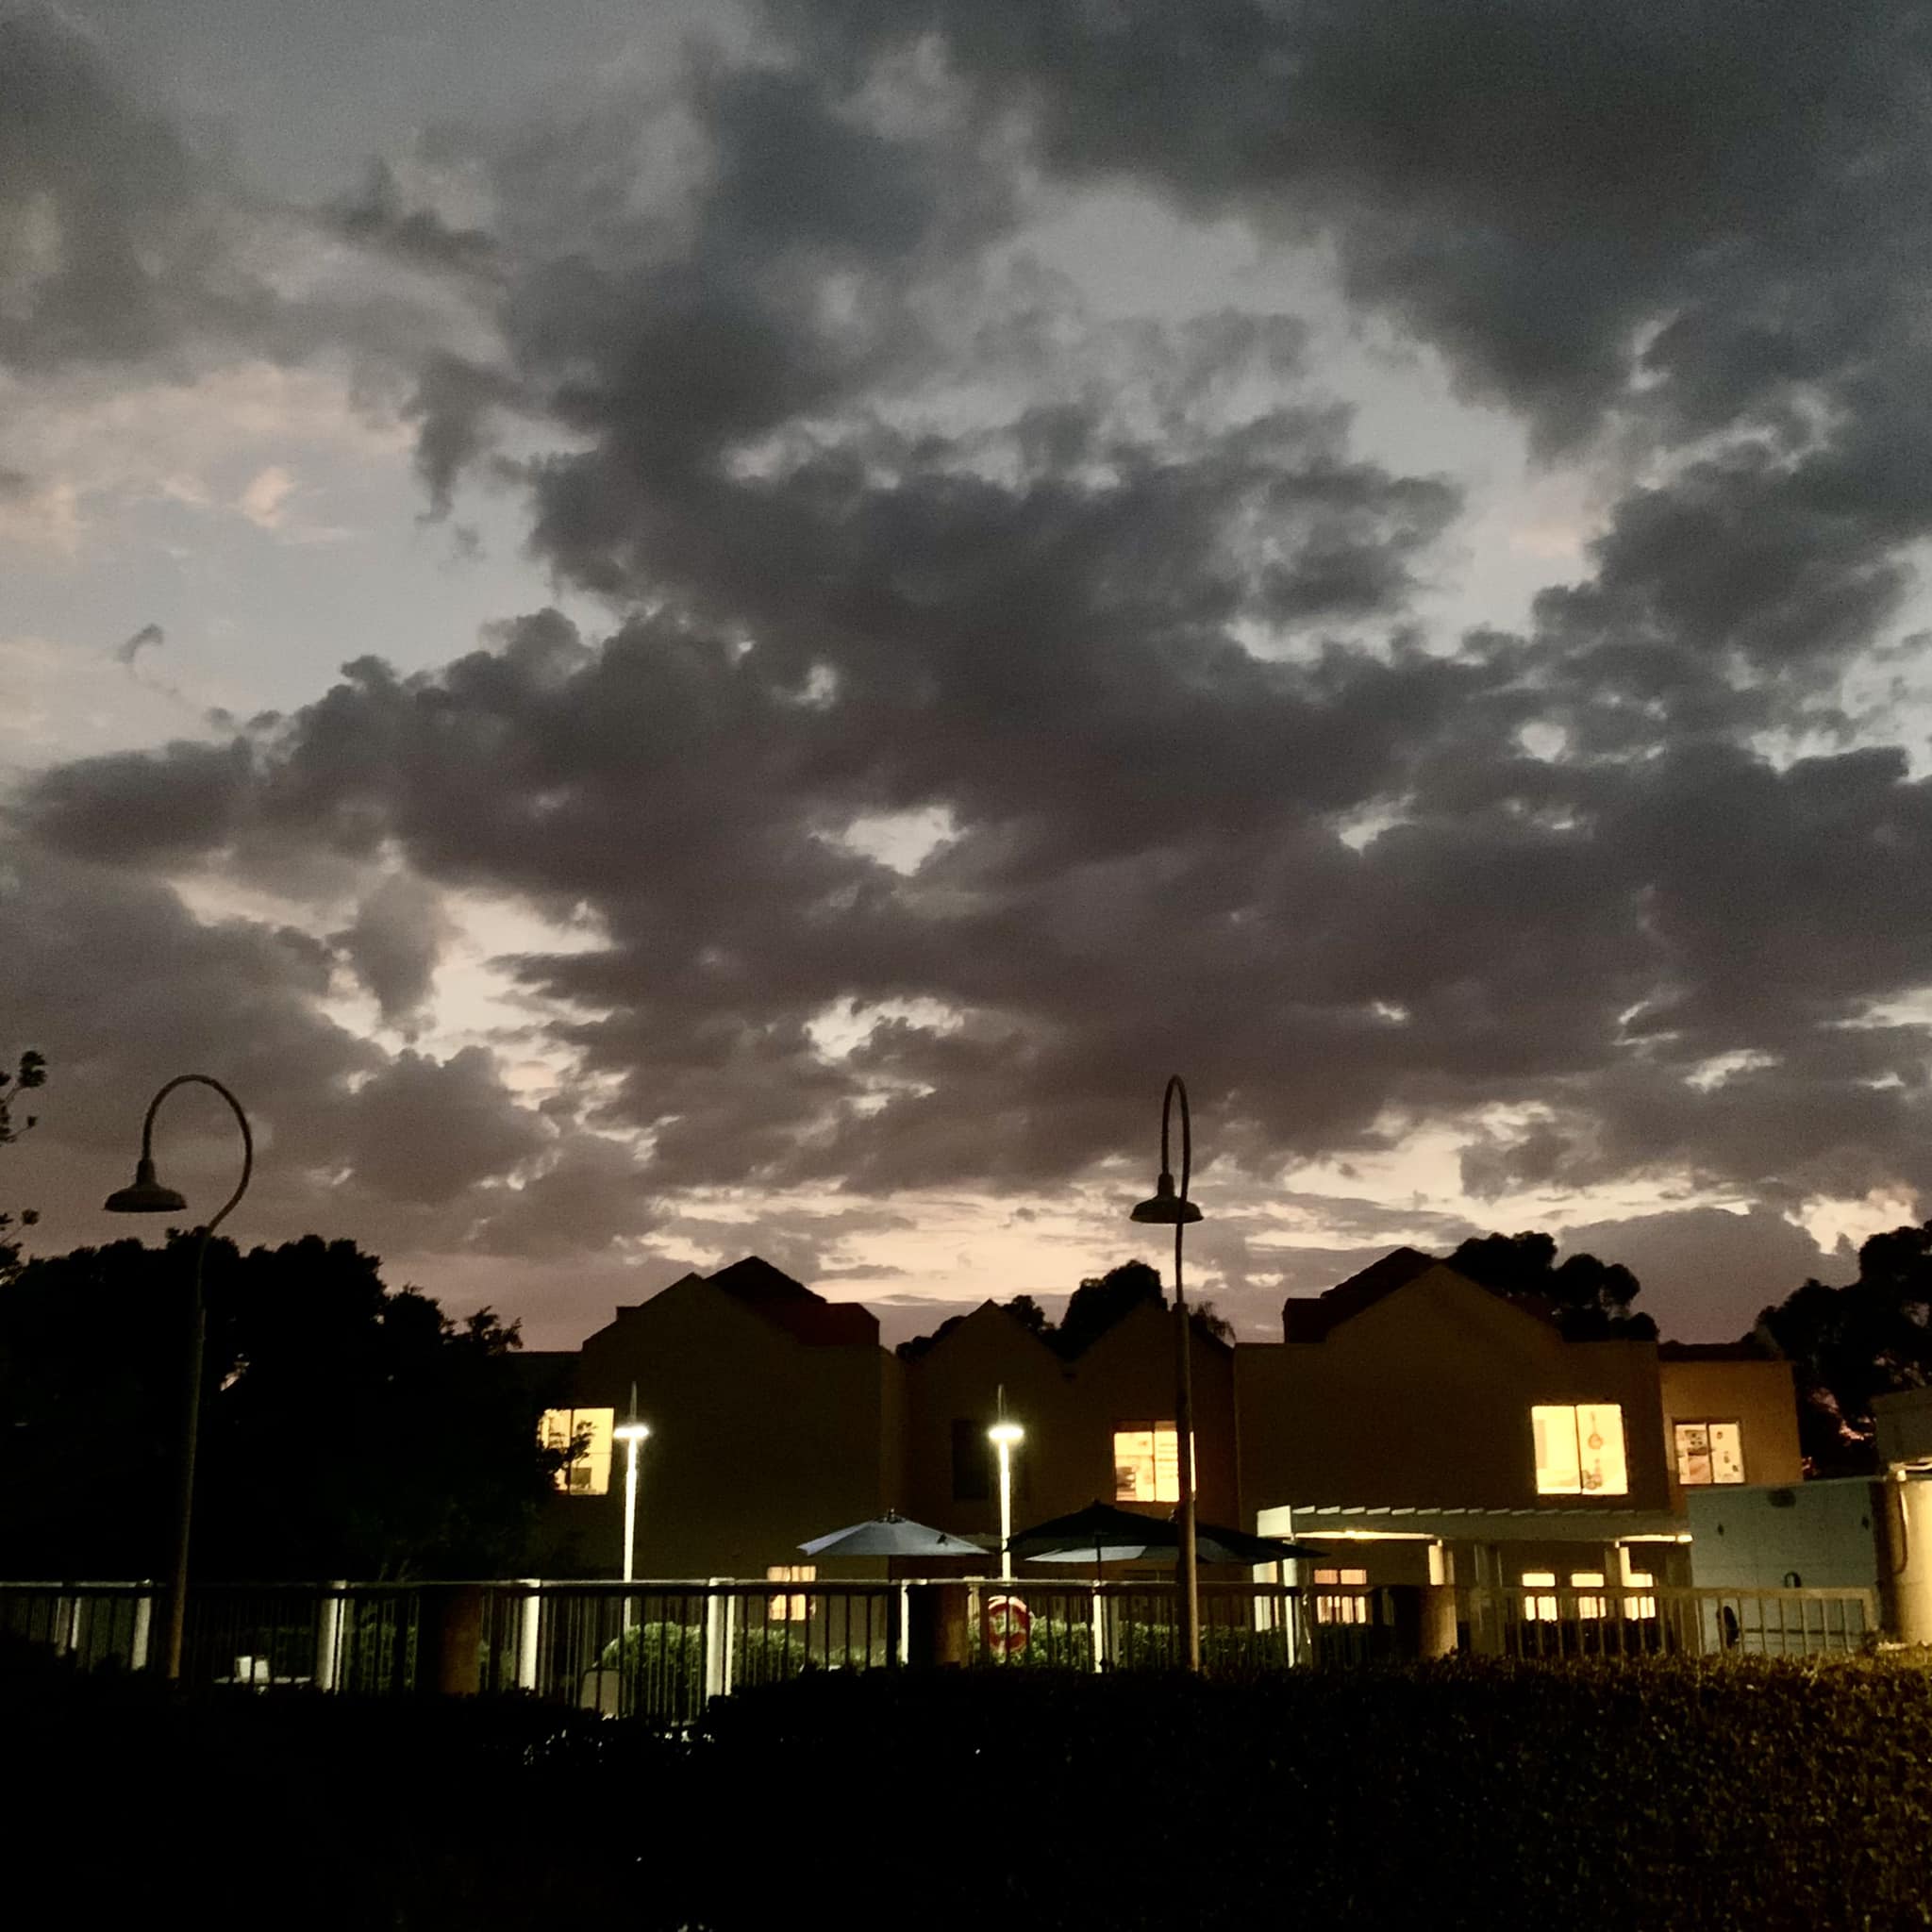 Post-storm skies: Last night at UCSB West Campus, looking at my house (on the left) and an adjacent unit